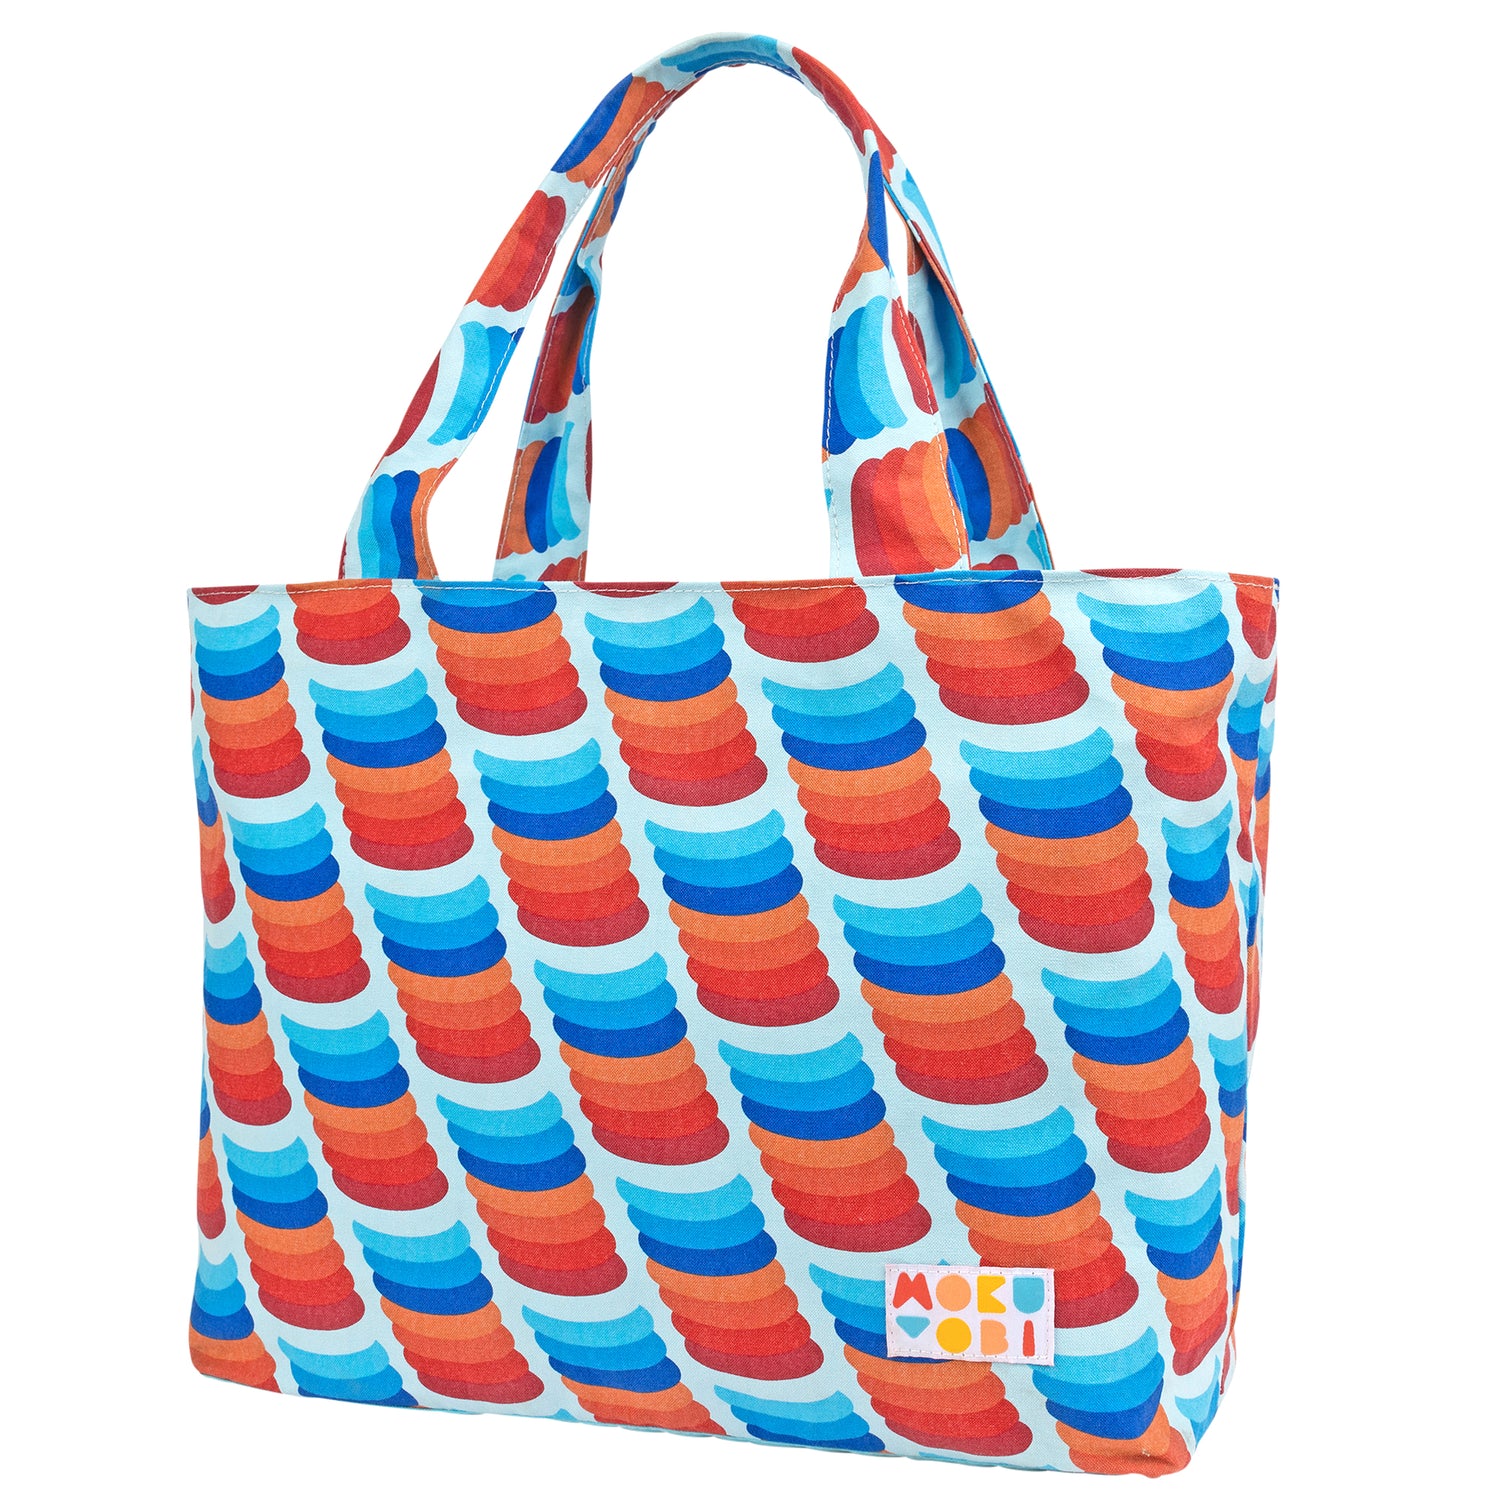 Large tote bag with colorful horizontal designs